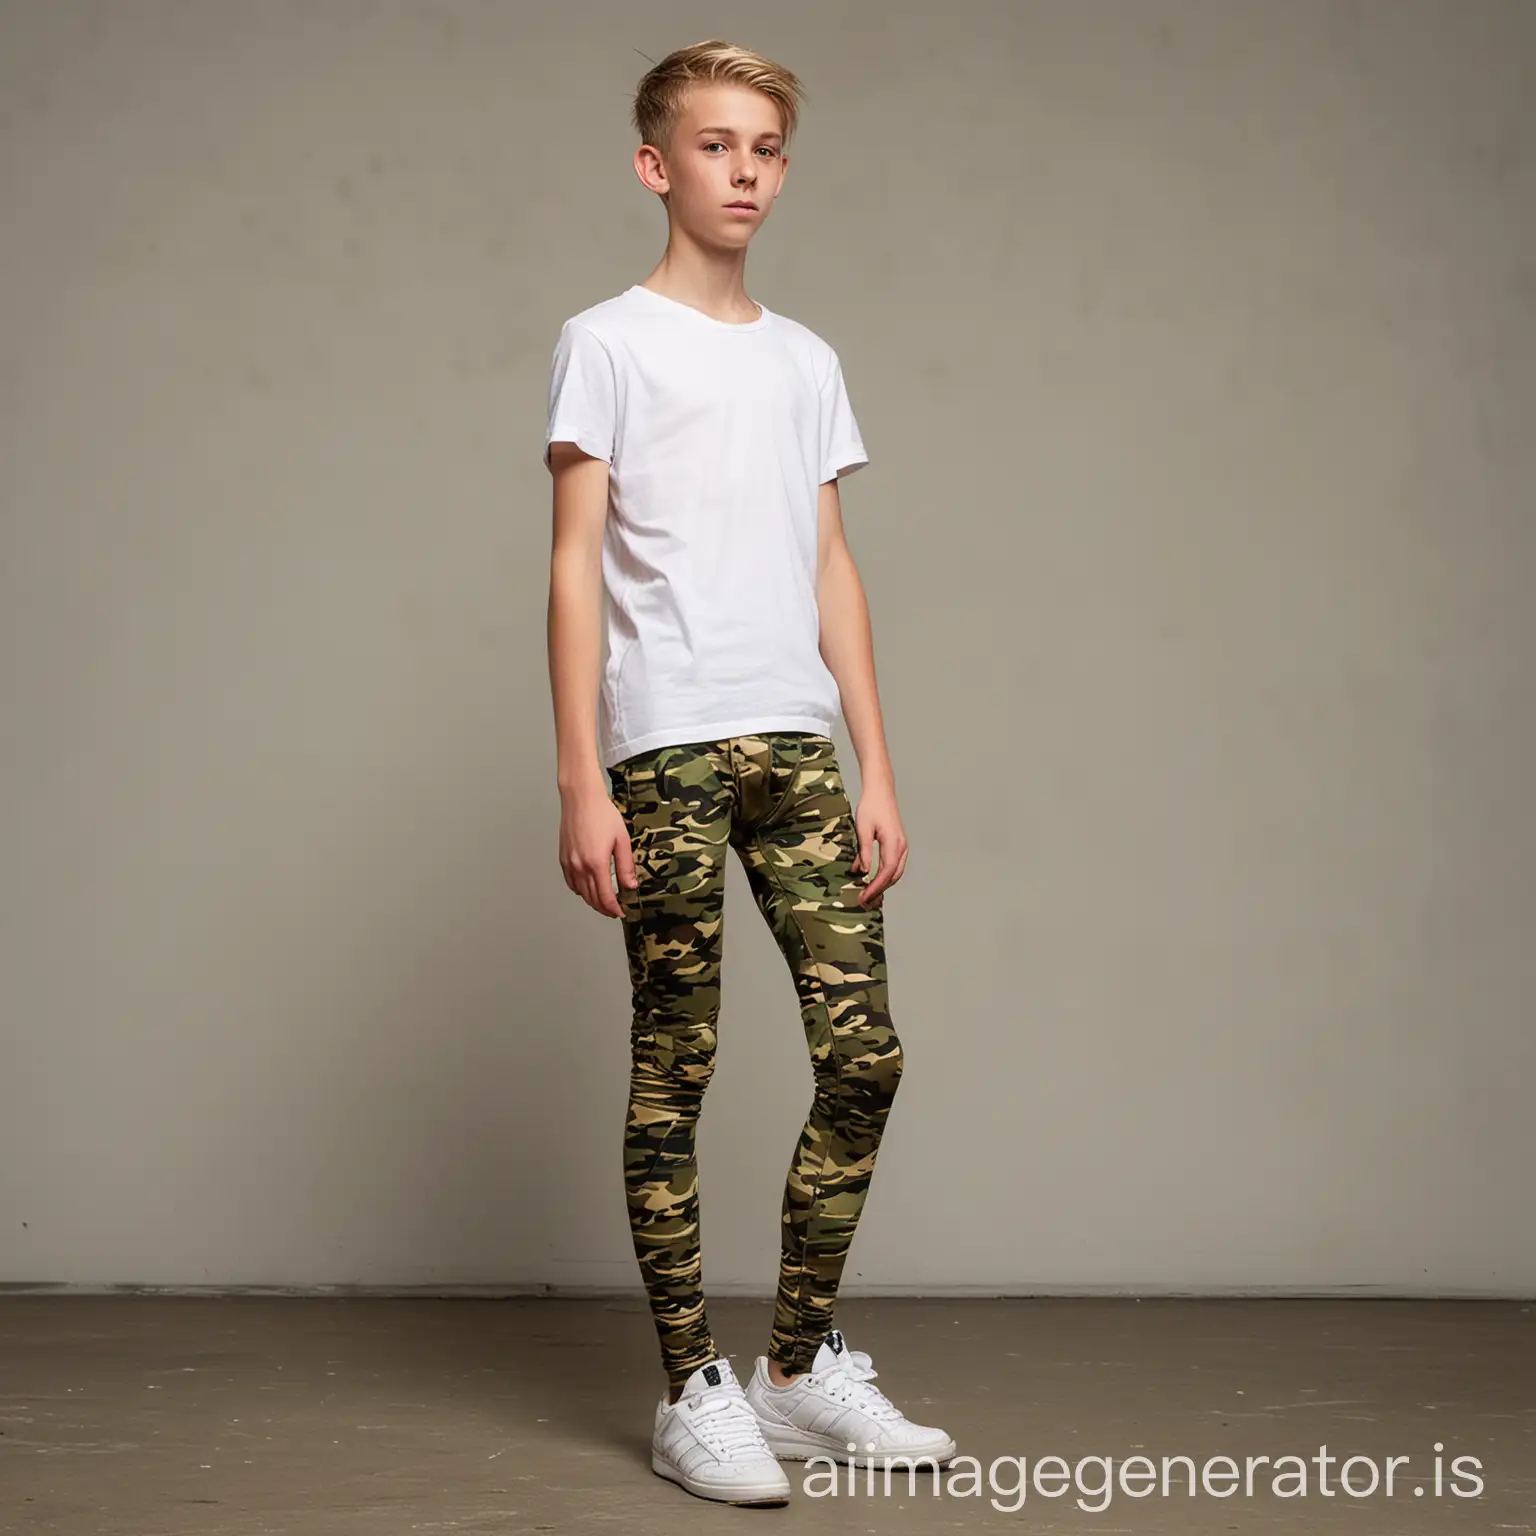 a 16-year-old very very skinny blonde boy dressed in camouflage tights and a white t-shirt